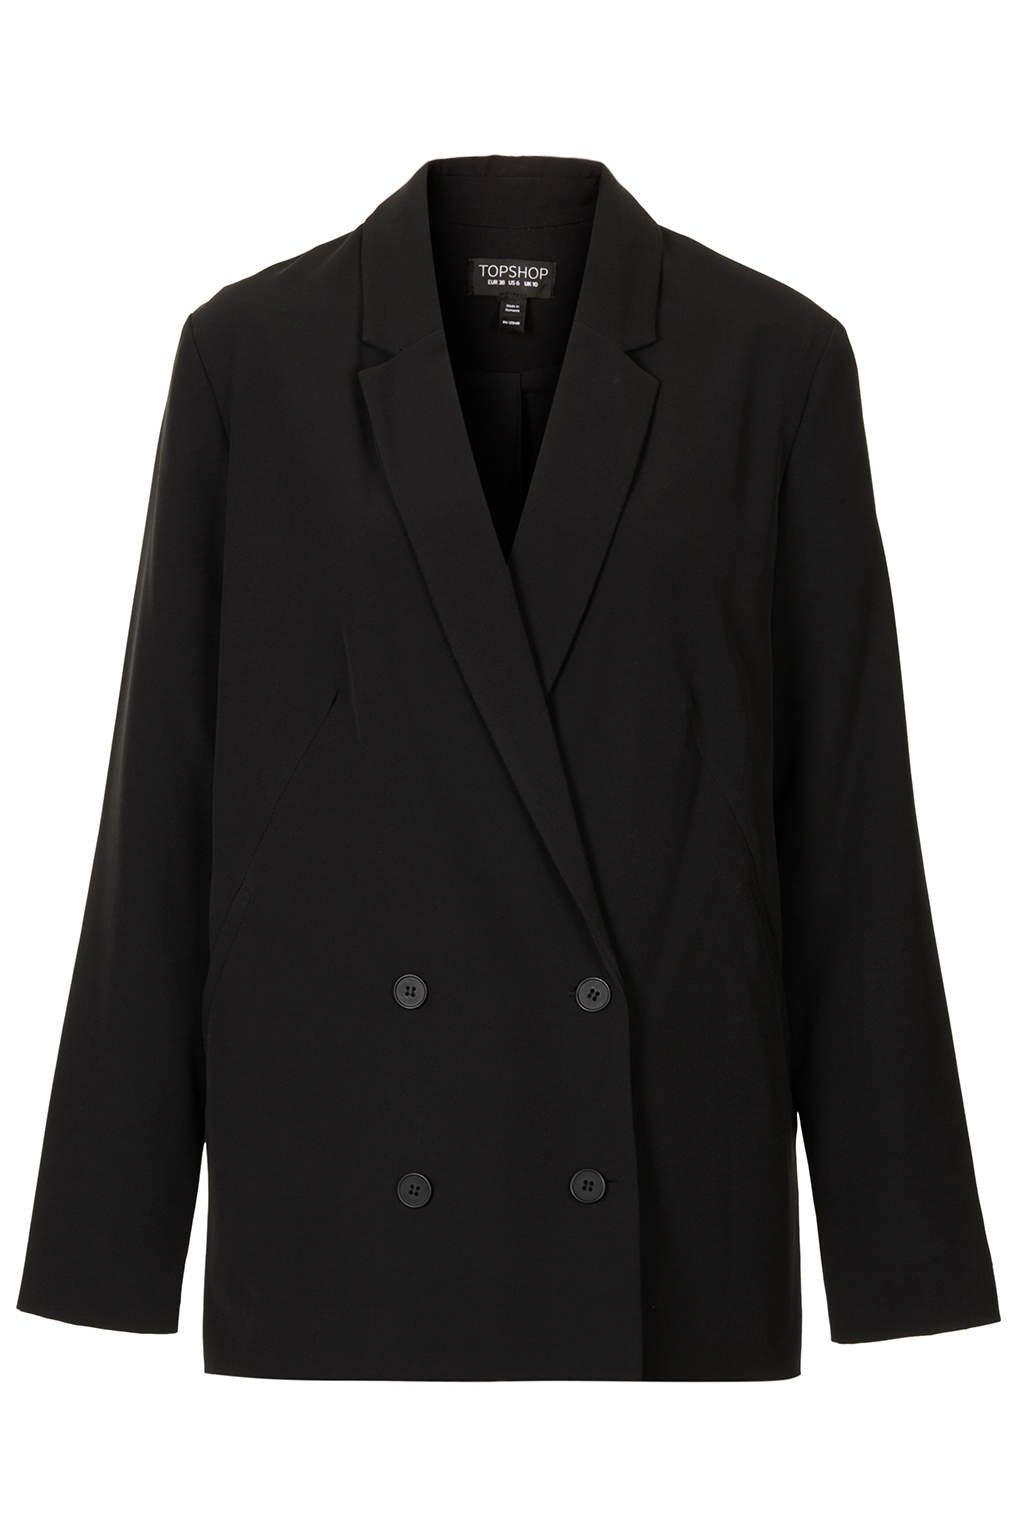 TOPSHOP Double Breasted Long Blazer in Black - Lyst